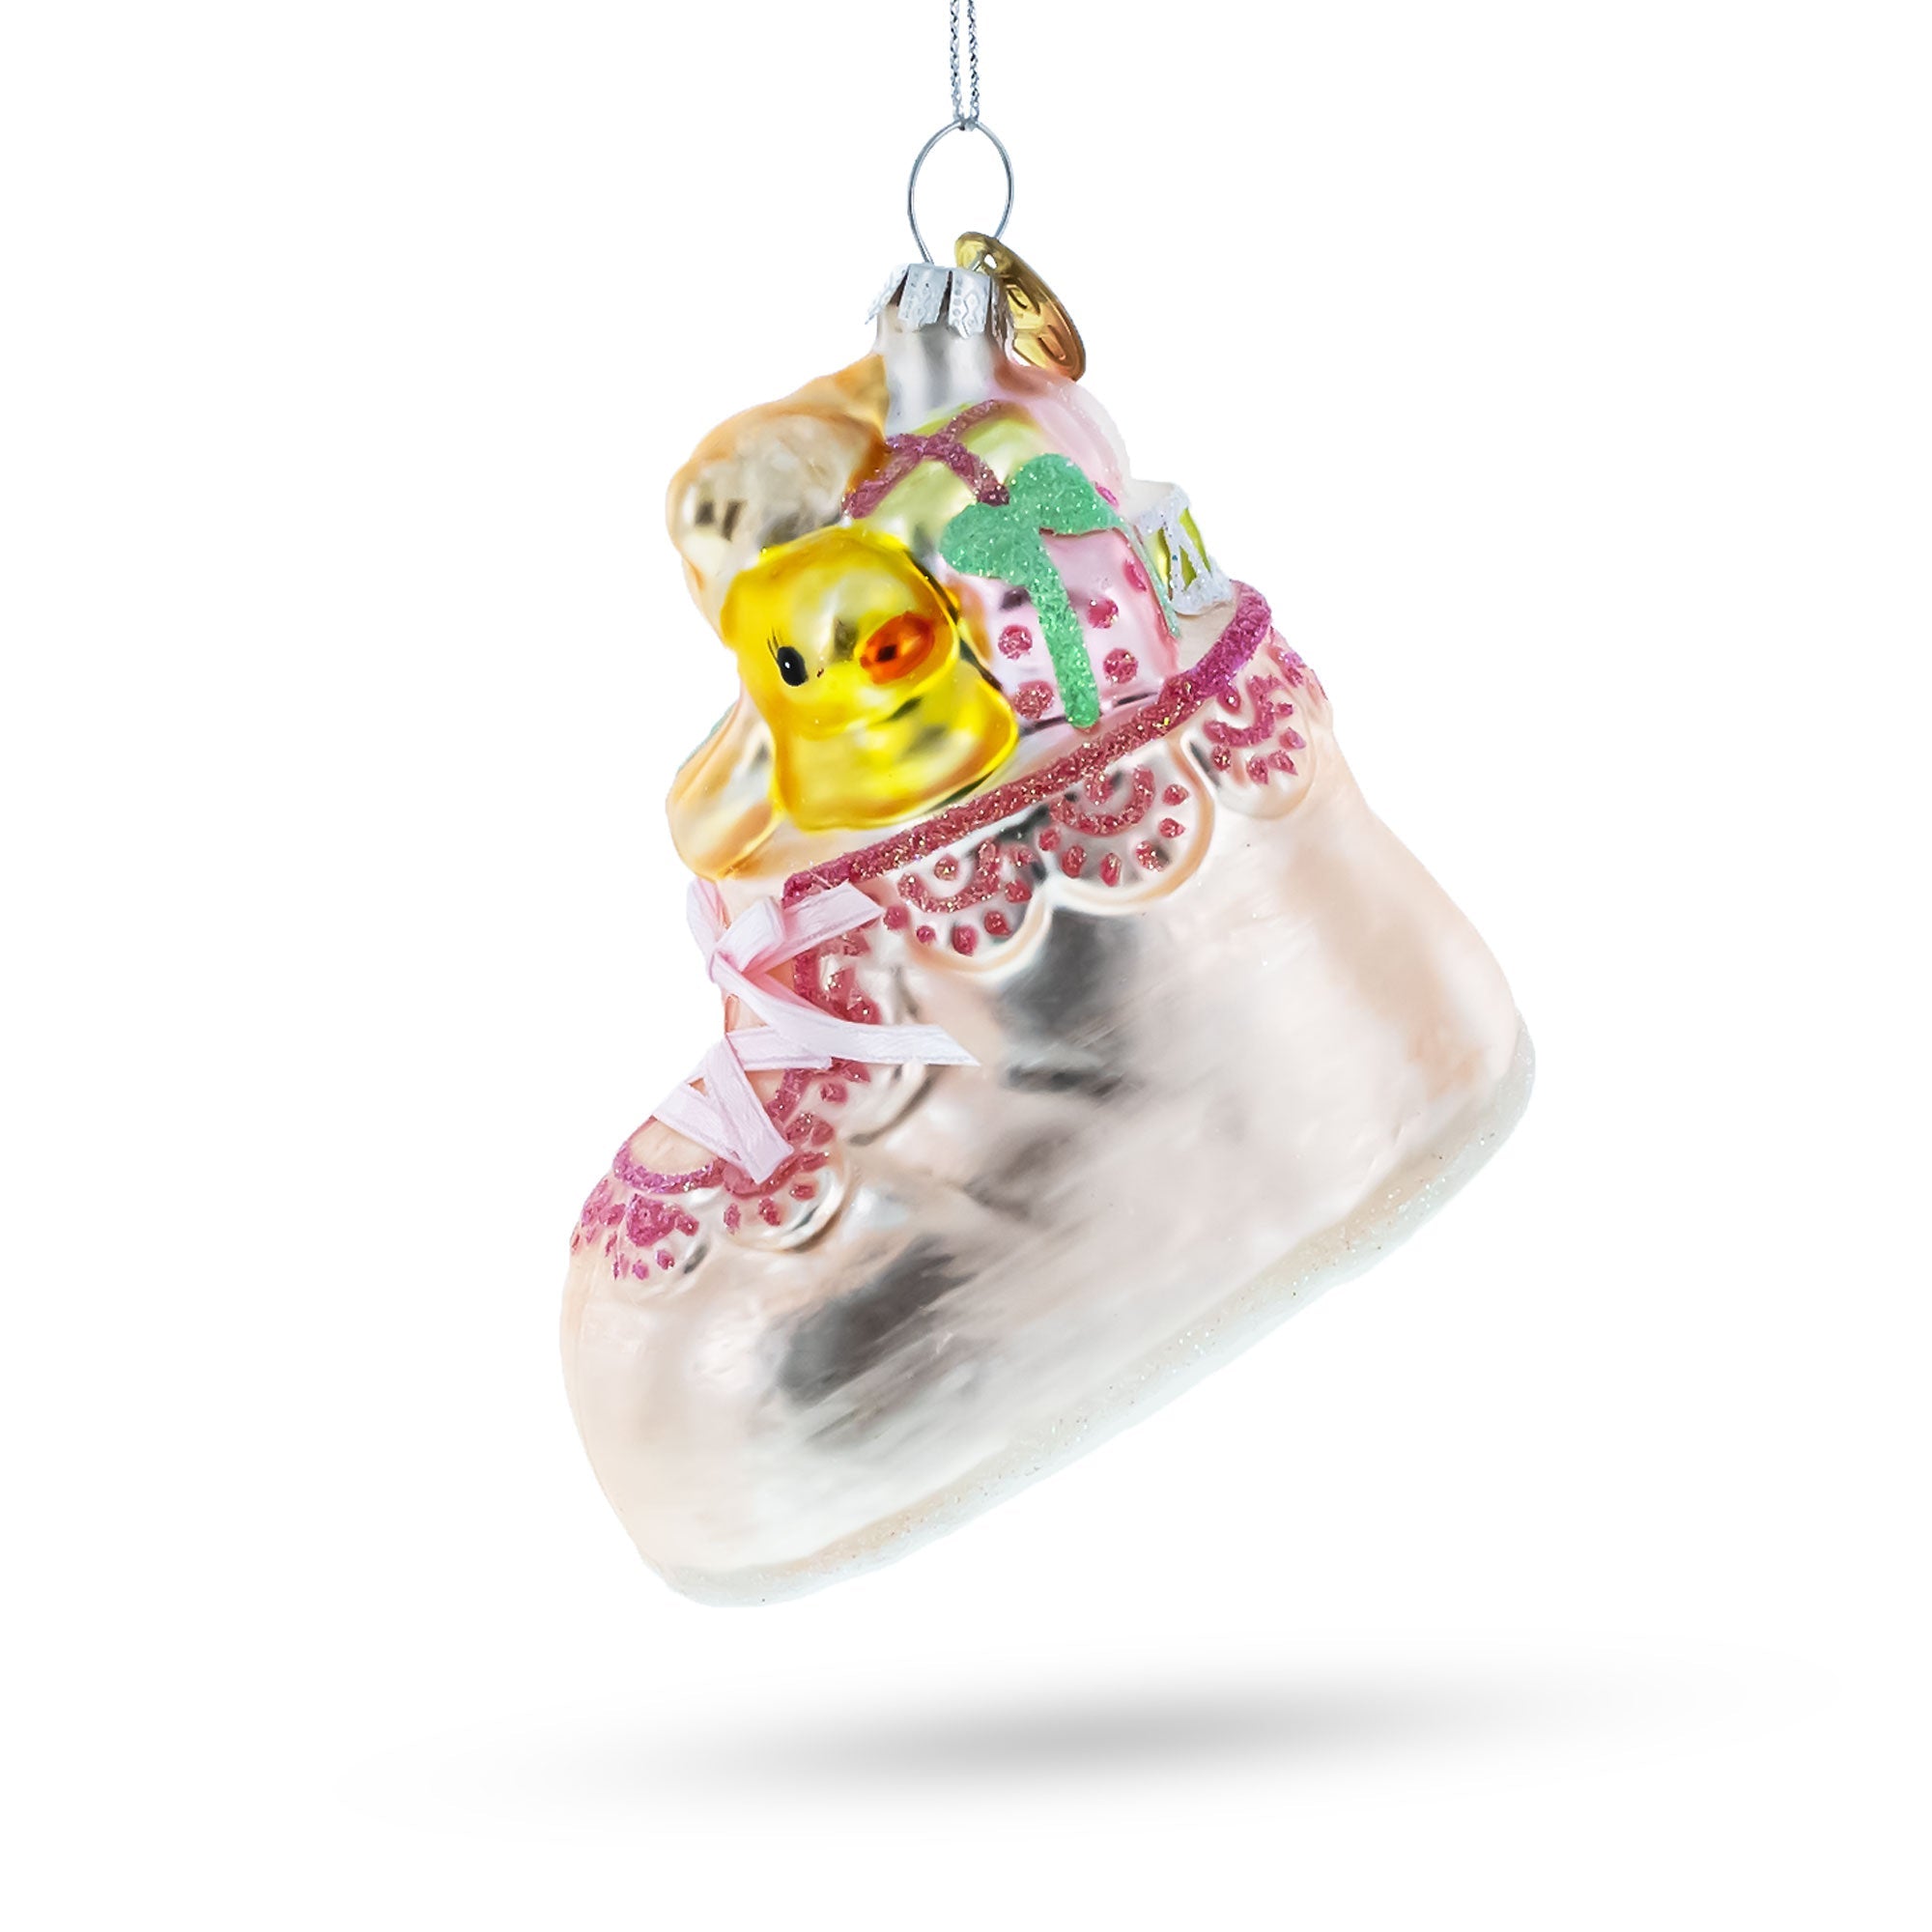 Teddy Bear Nestled In Pink Boot - Baby's First Blown - Lovable Blown Glass Christmas Ornament